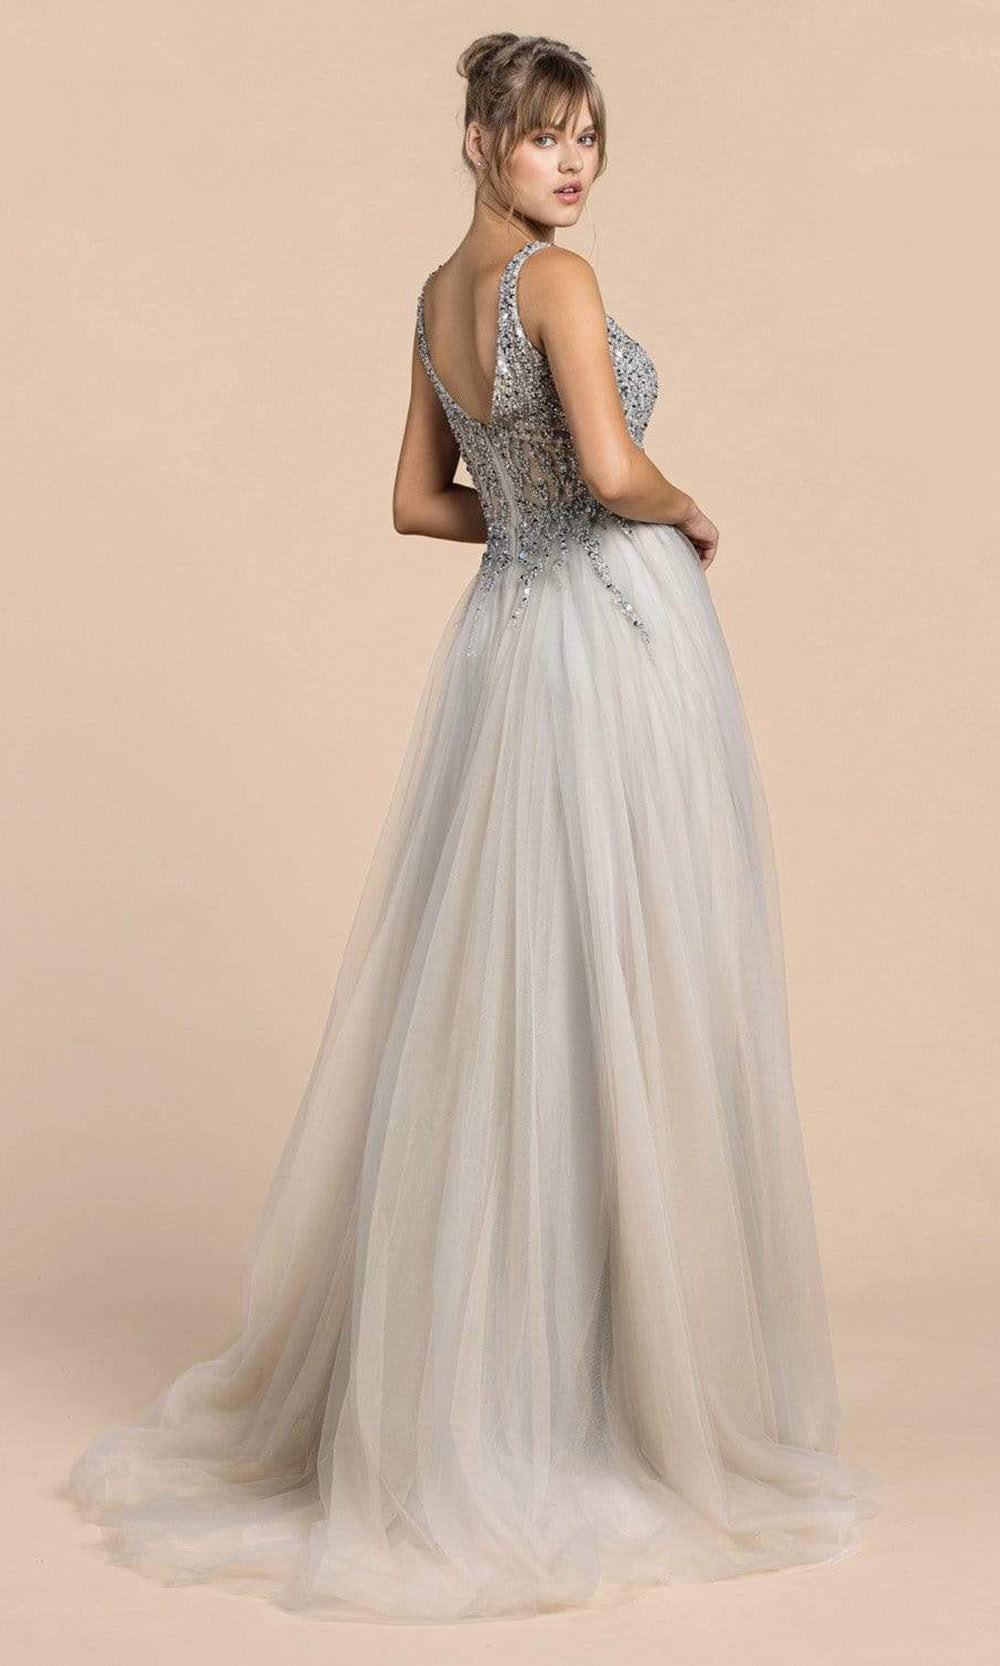 Andrea and Leo - A0391 Beaded Illusion Bodice High Slit Gown In Silver and Gray